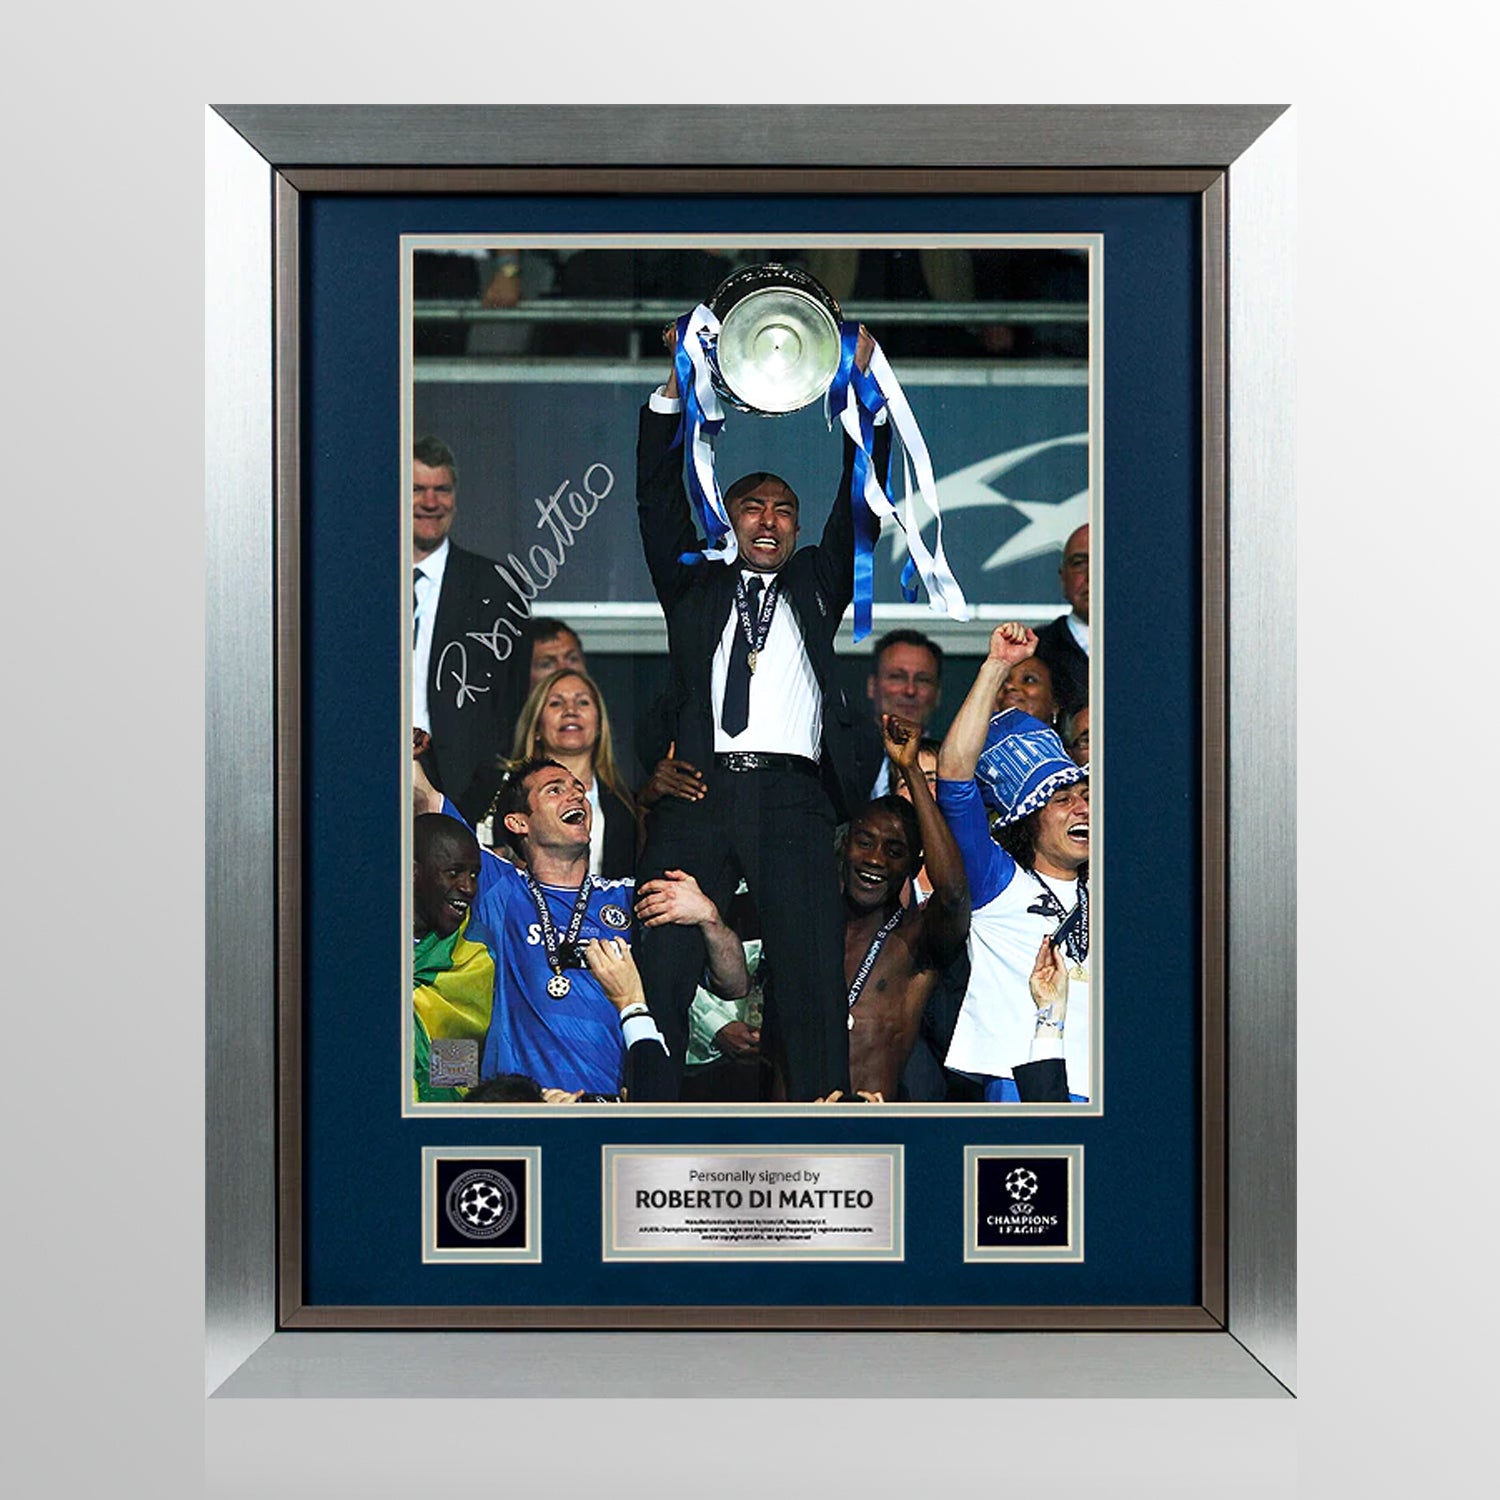 Roberto Di Matteo Official UEFA Champions League Signed and Framed Chelsea Photo: 2012 Winner UEFA Club Competitions Online Store